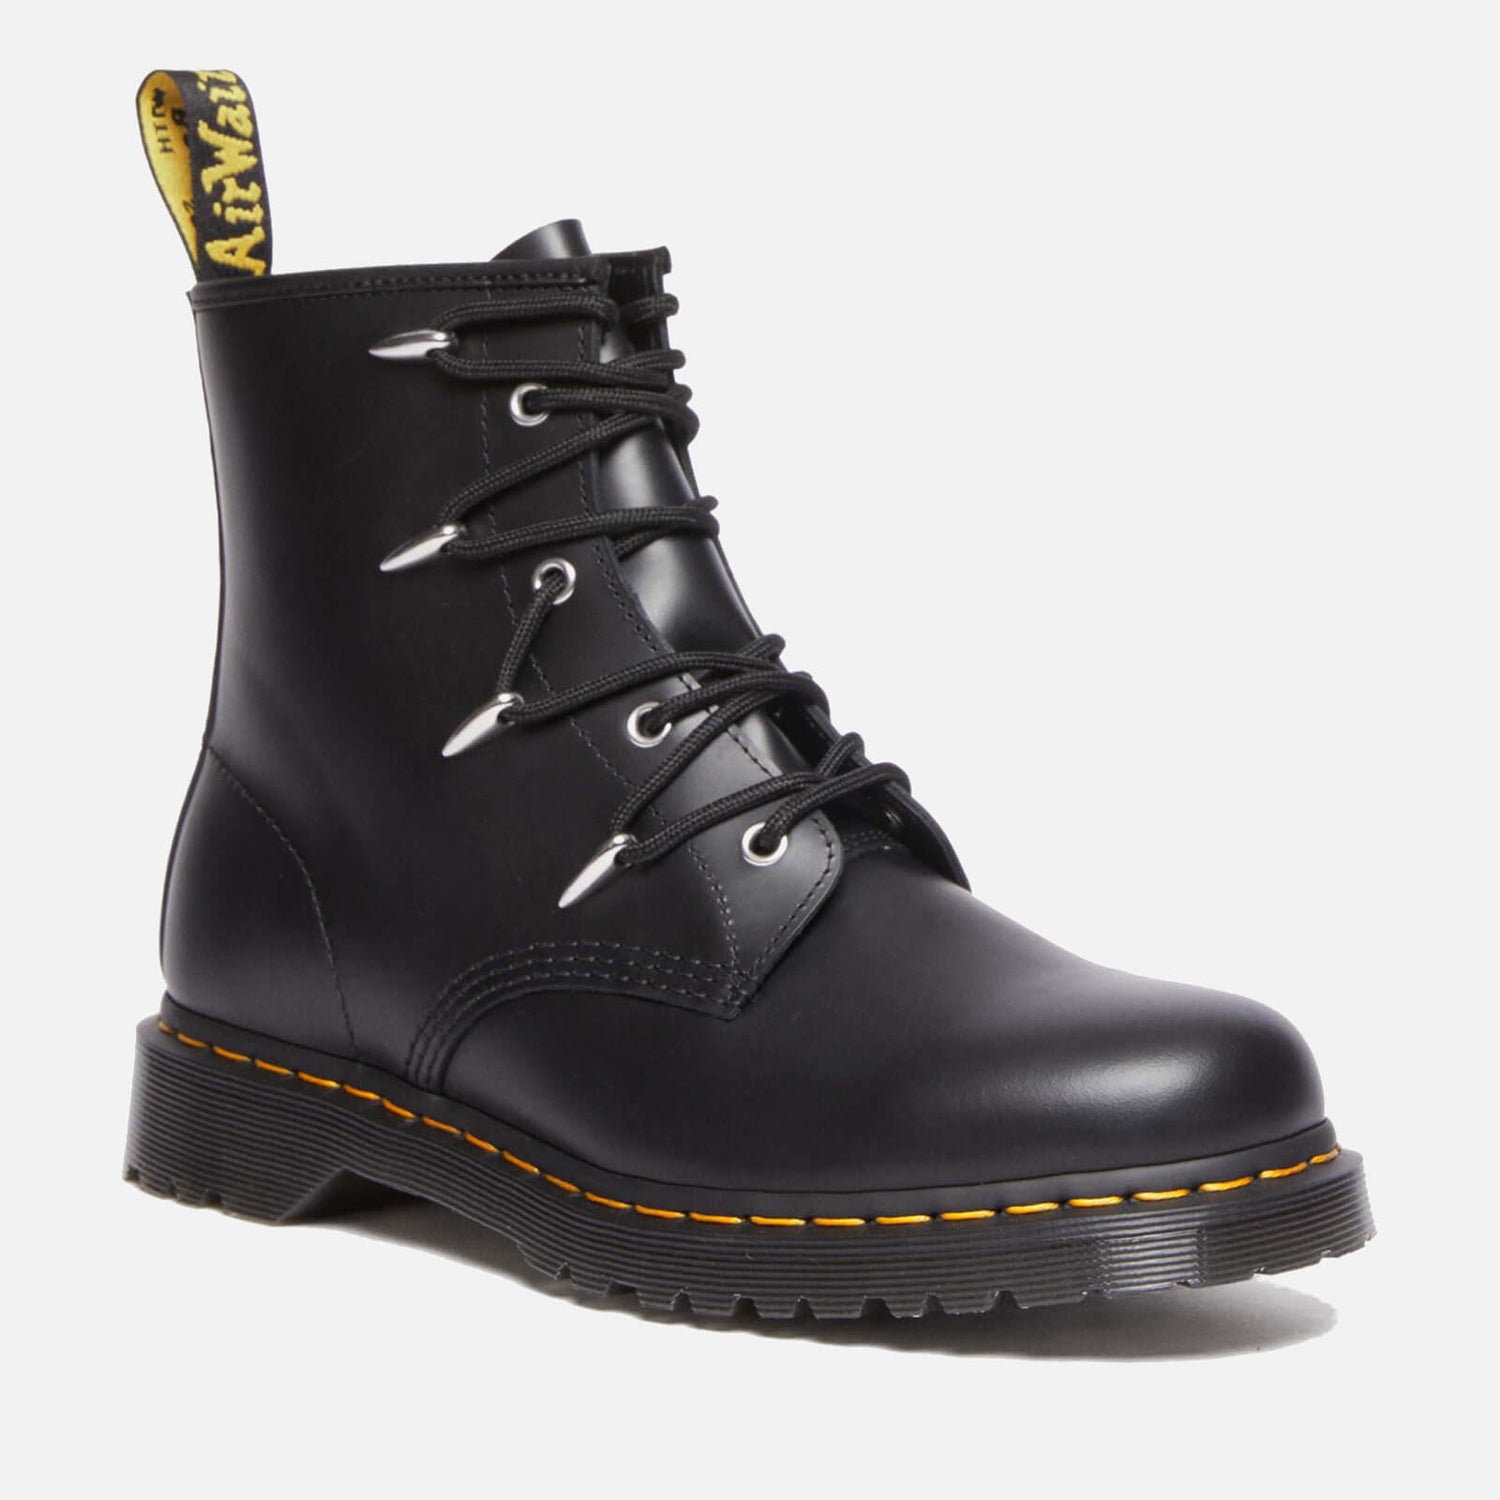 Dr. Martens Women's 1460 Leather 8-Eye Boots - UK 3